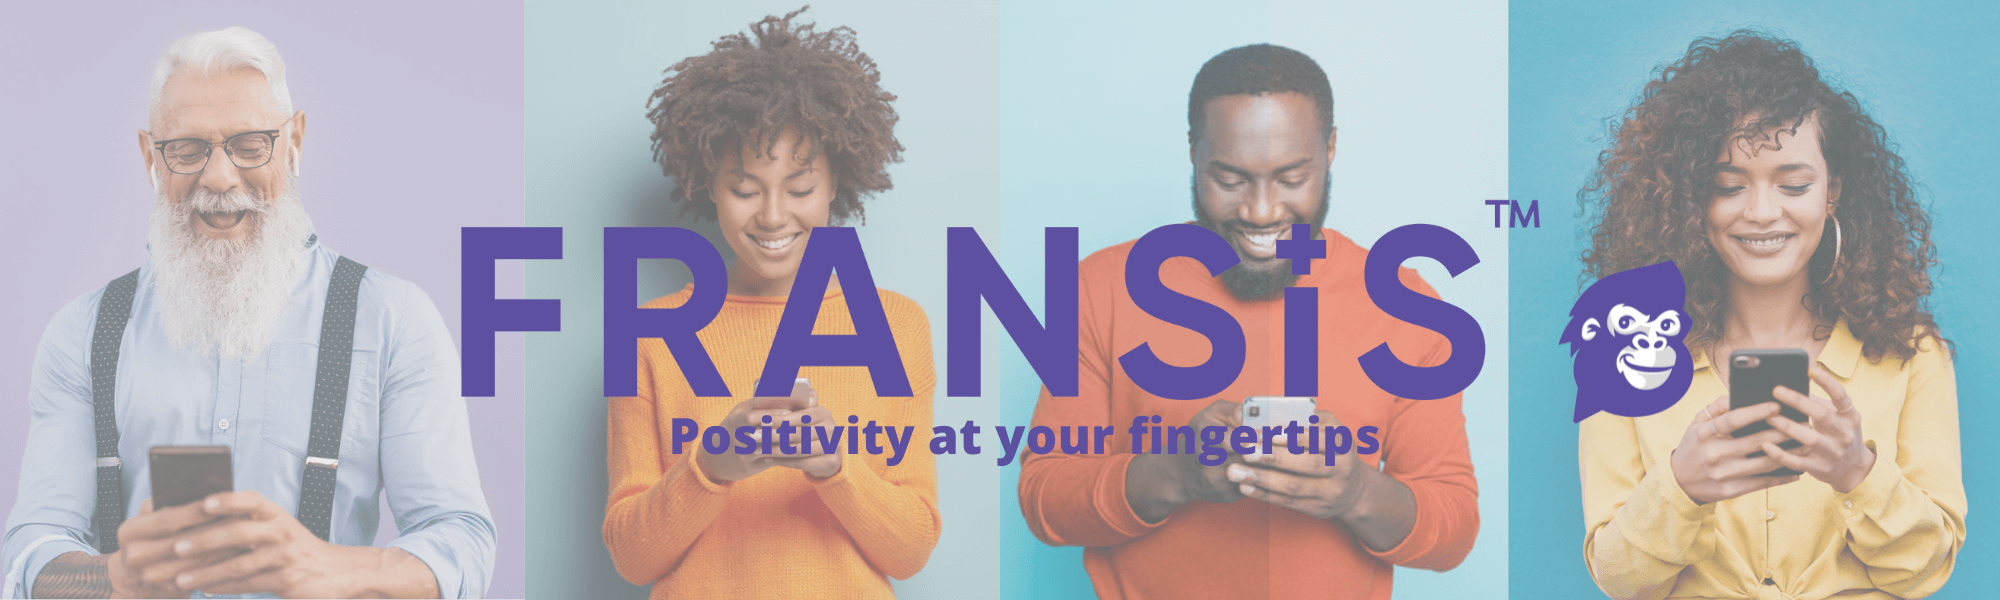 FRANSiS™: Positivity at your fingertips